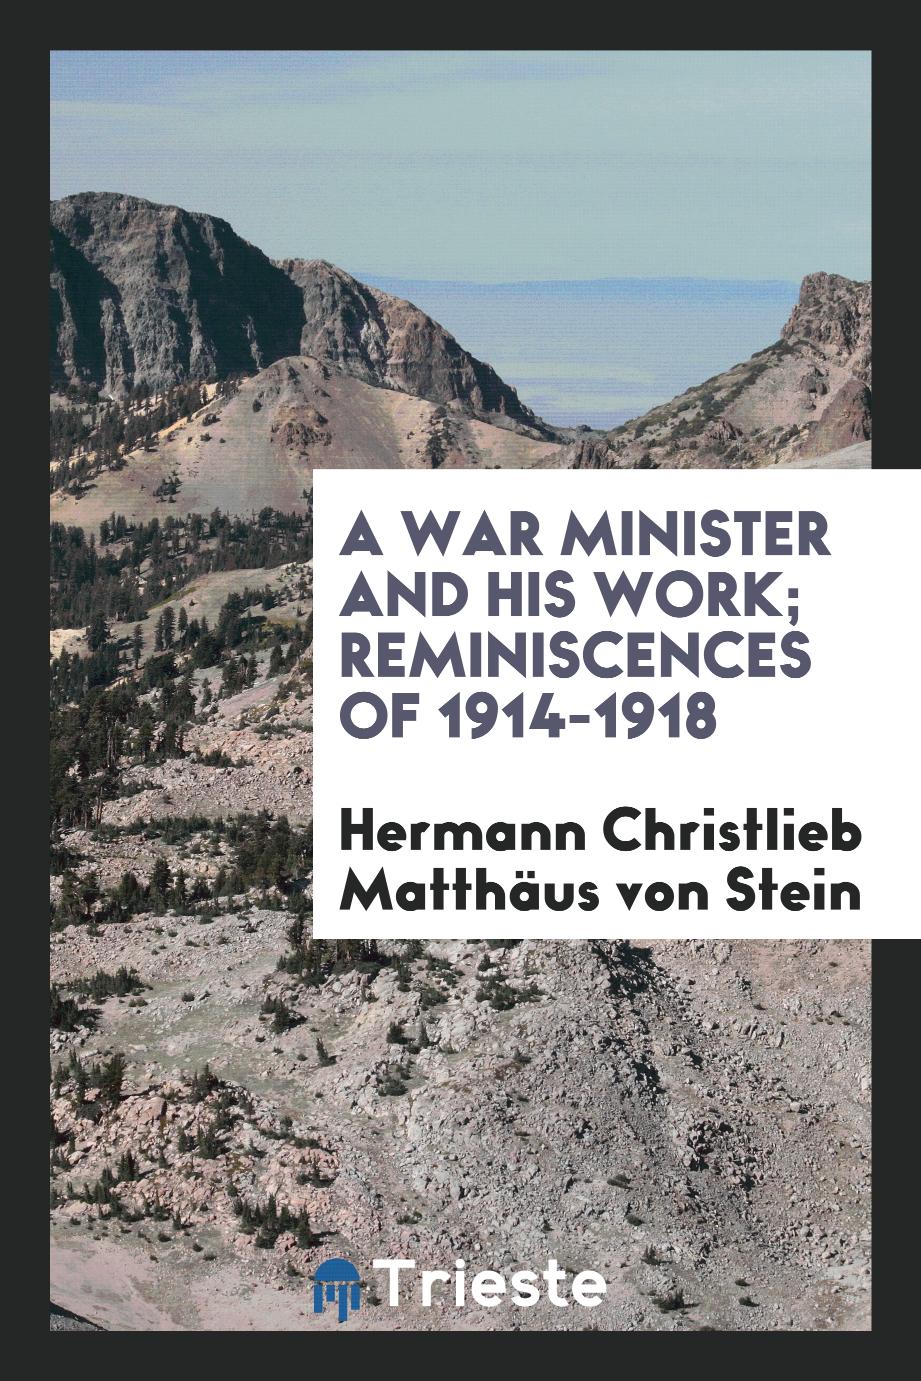 A war minister and his work; reminiscences of 1914-1918